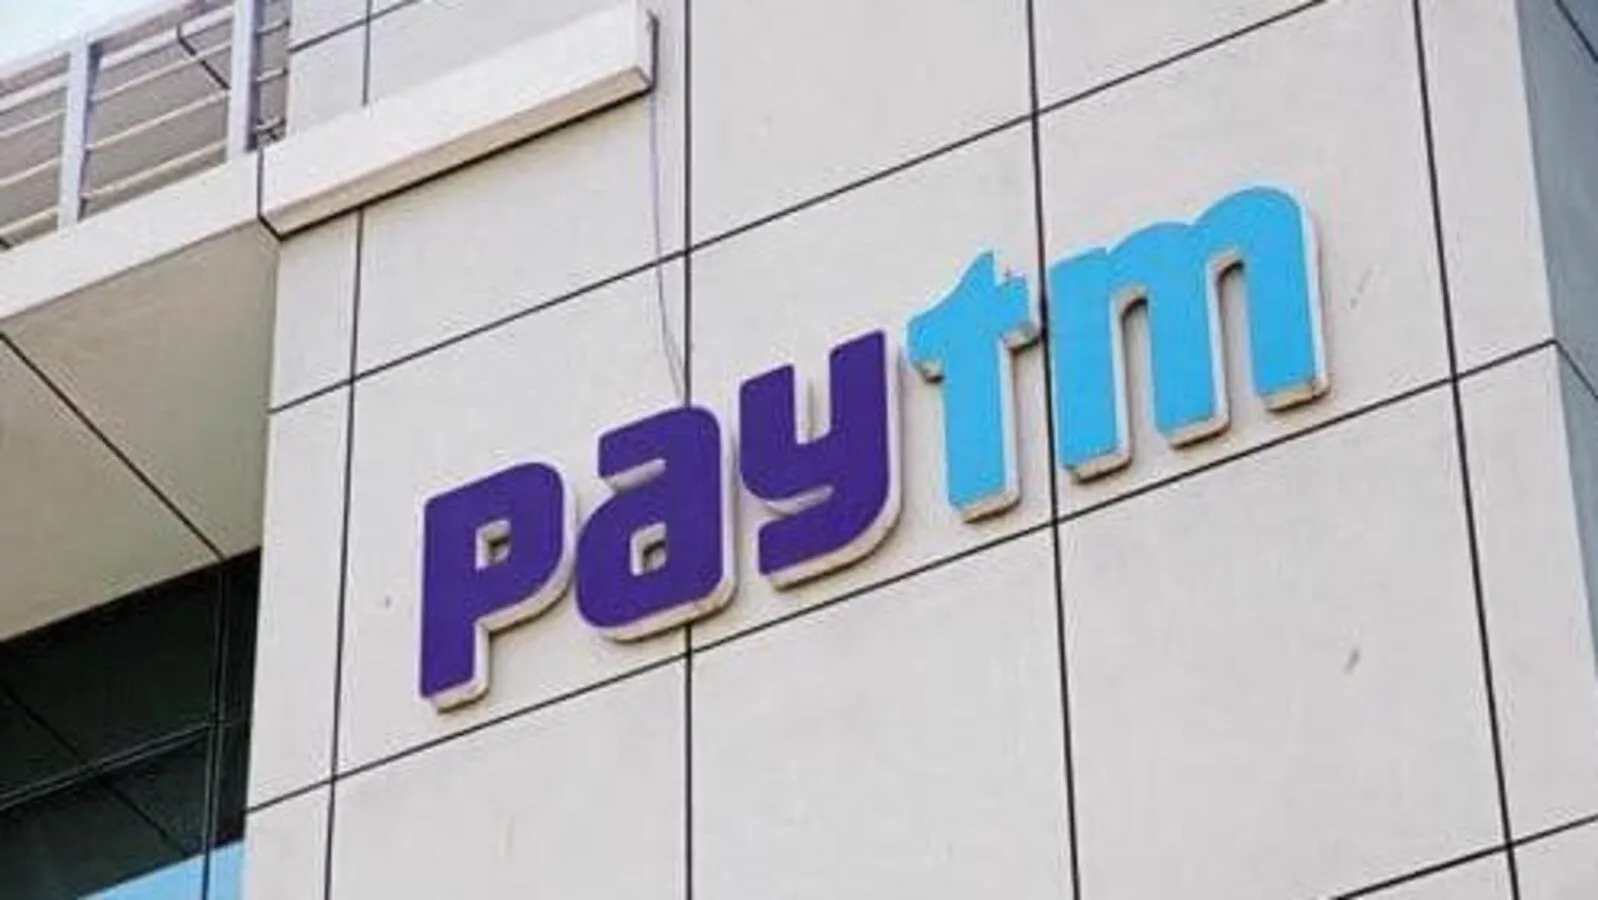 Paytm shifts nodal account to Axis Bank; Soundbox, Card machine to continue working even after March 15